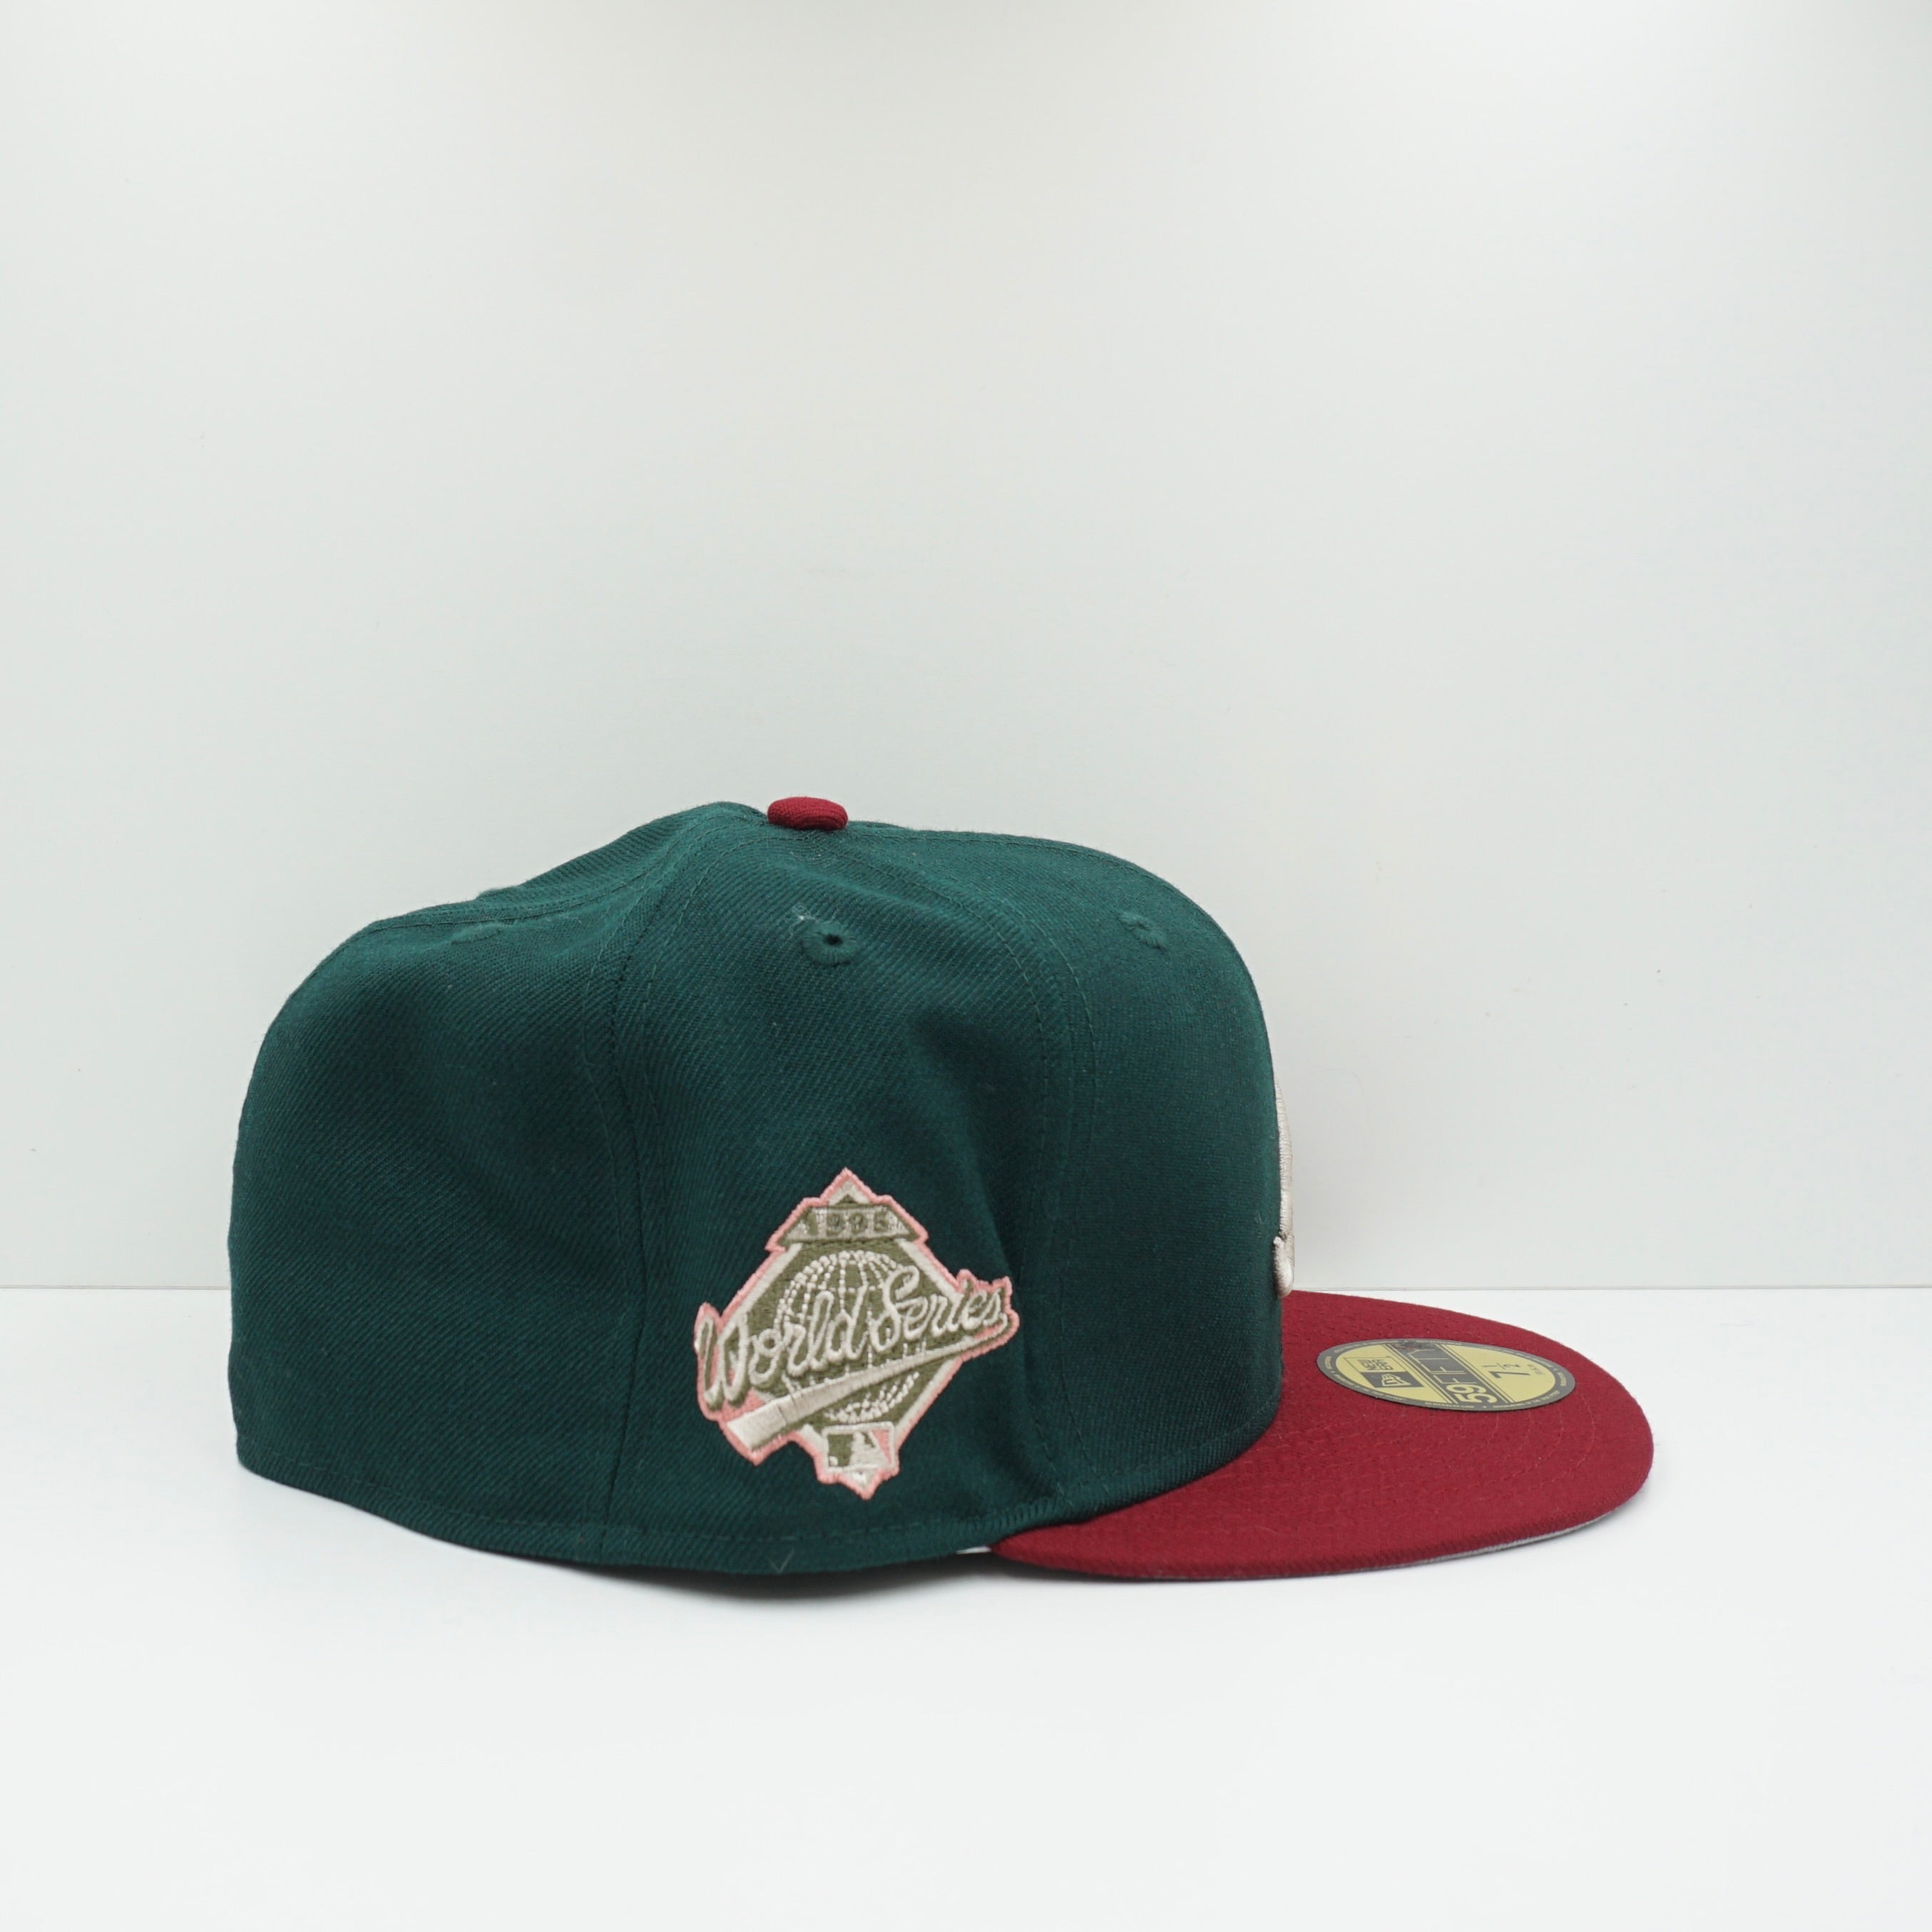 New Era Cooperstown Atlanta Braves Green/Red Fitted Cap